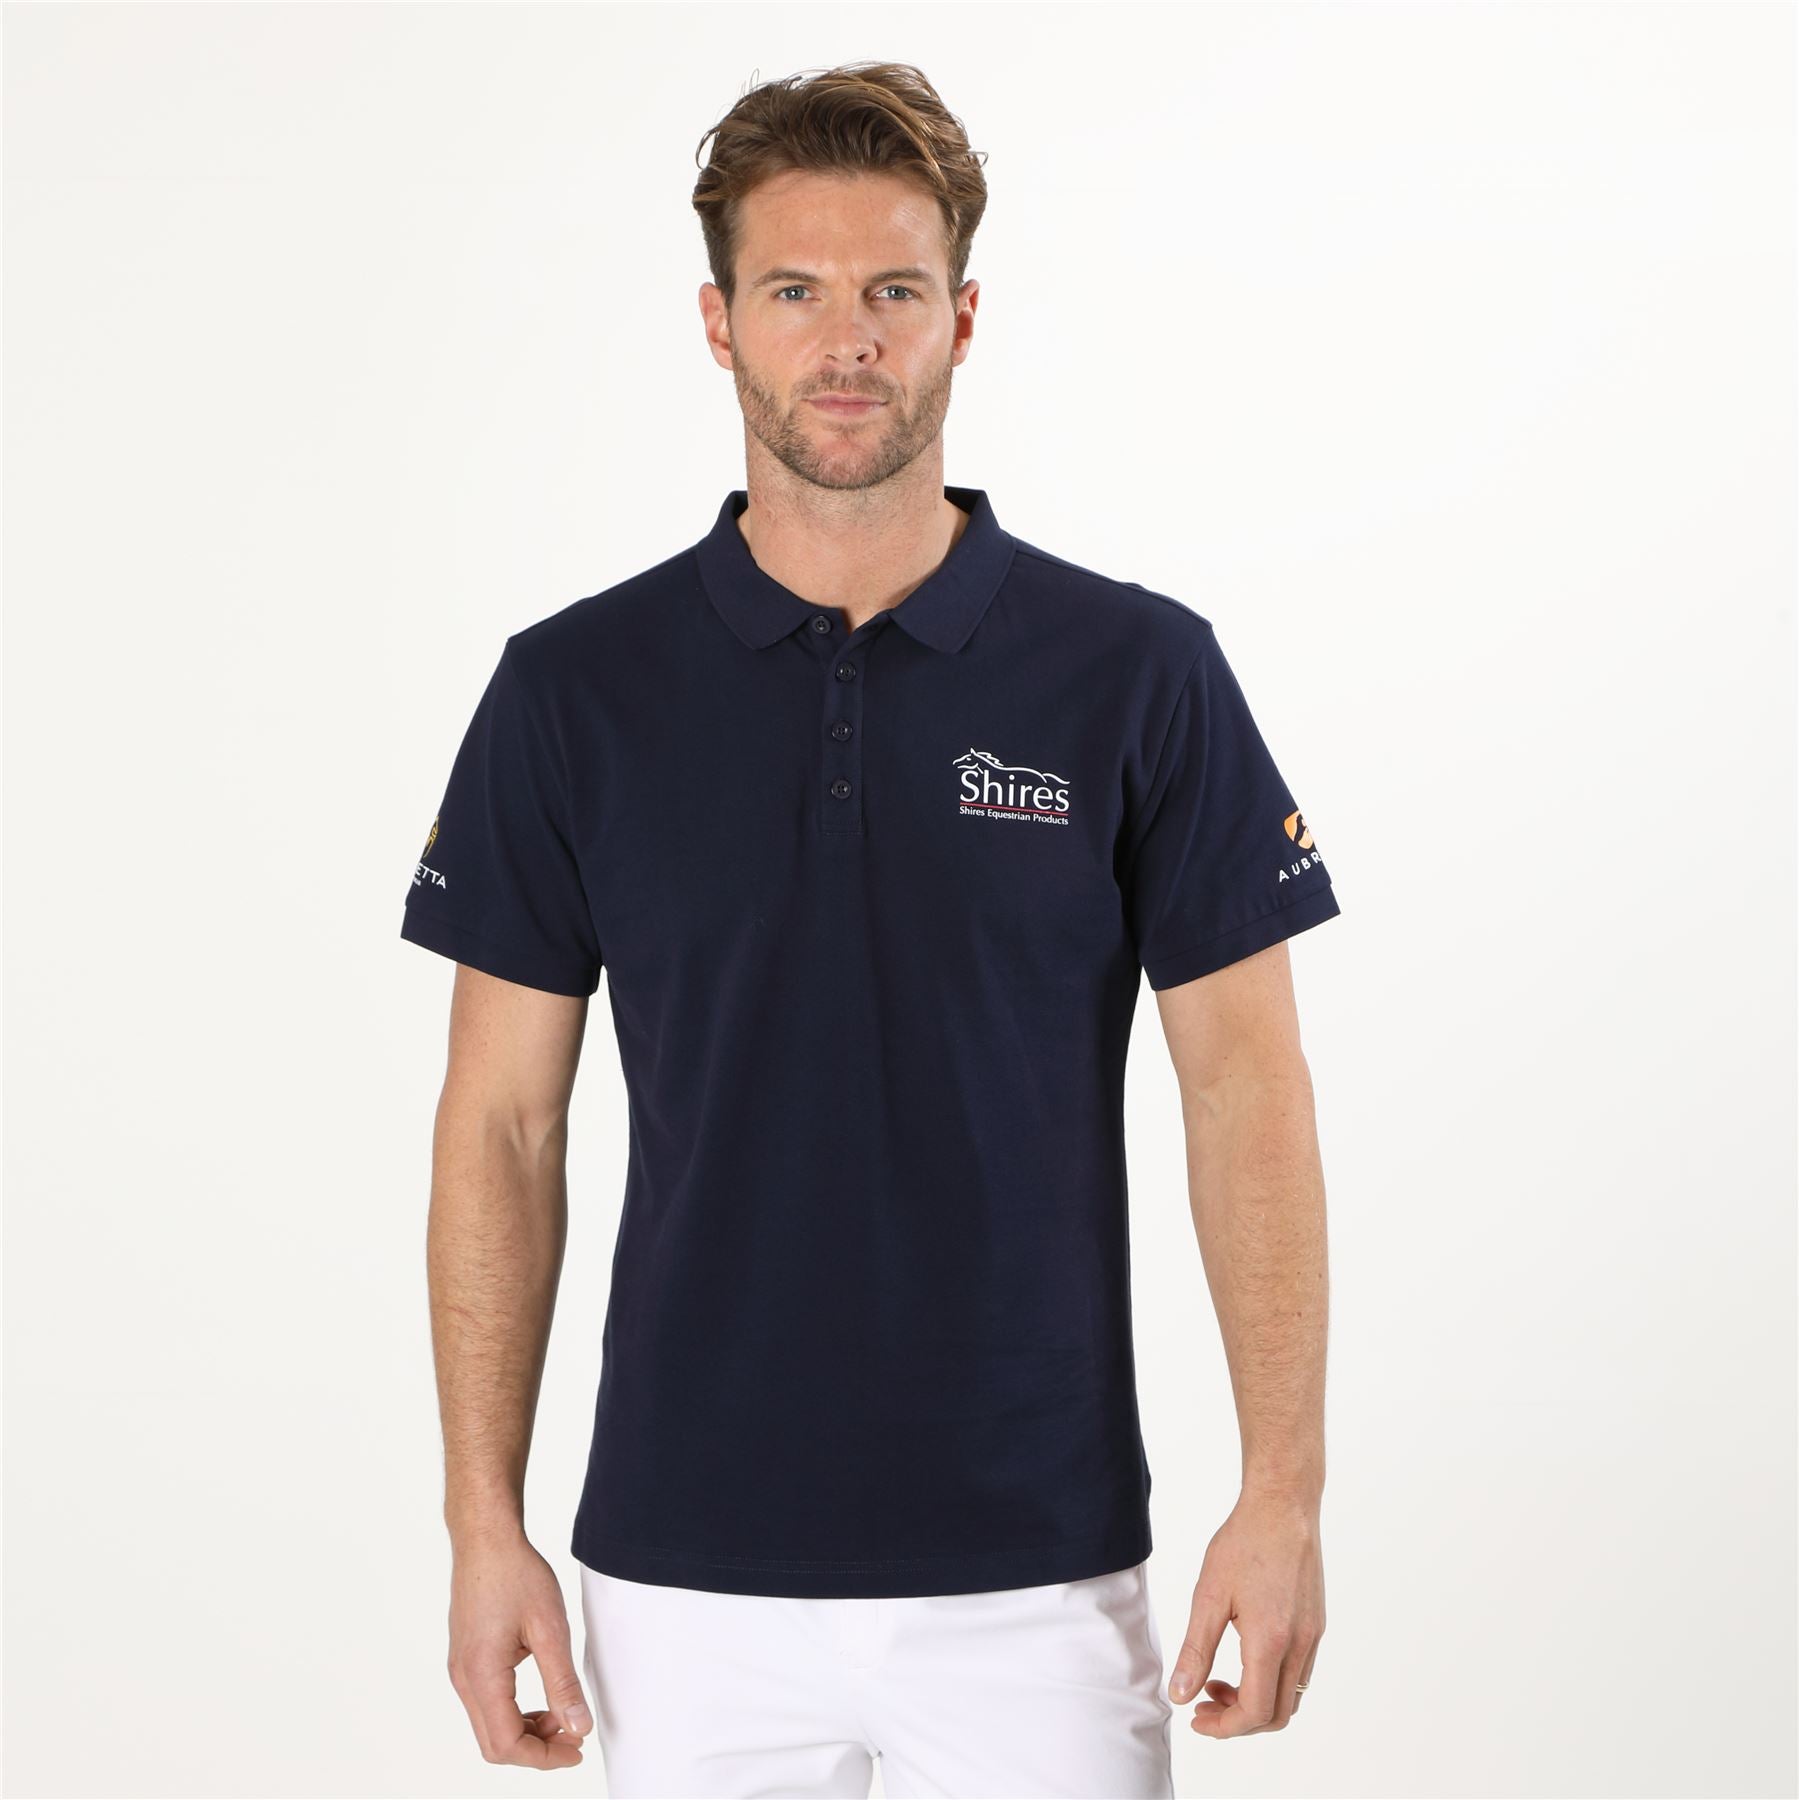 Aubrion Branded Polo Shirt - Gents - Just Horse Riders